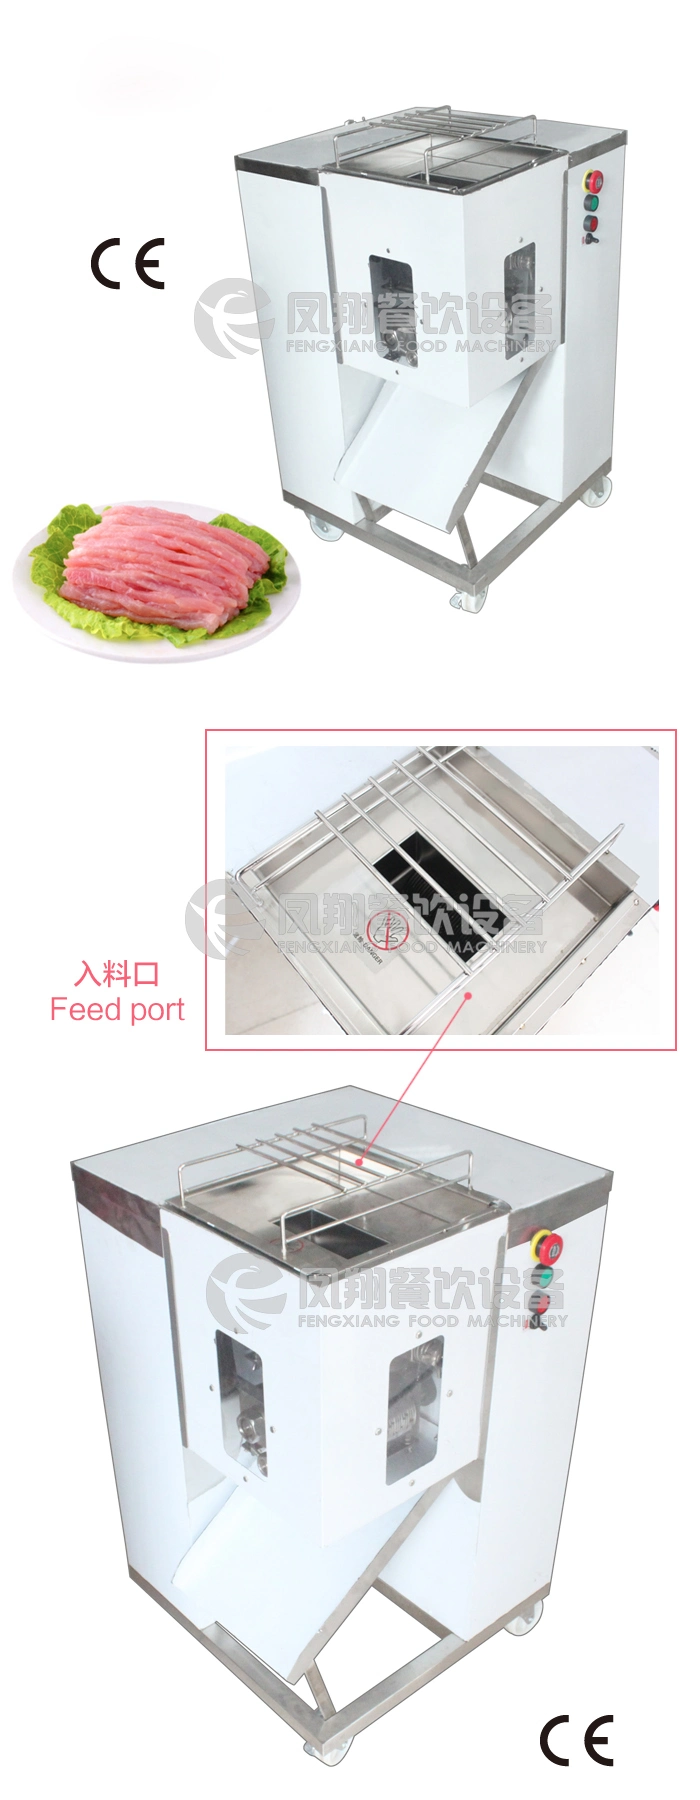 CE Approved High Efficiency Beef Meat Mutton Beef Slicer Machine